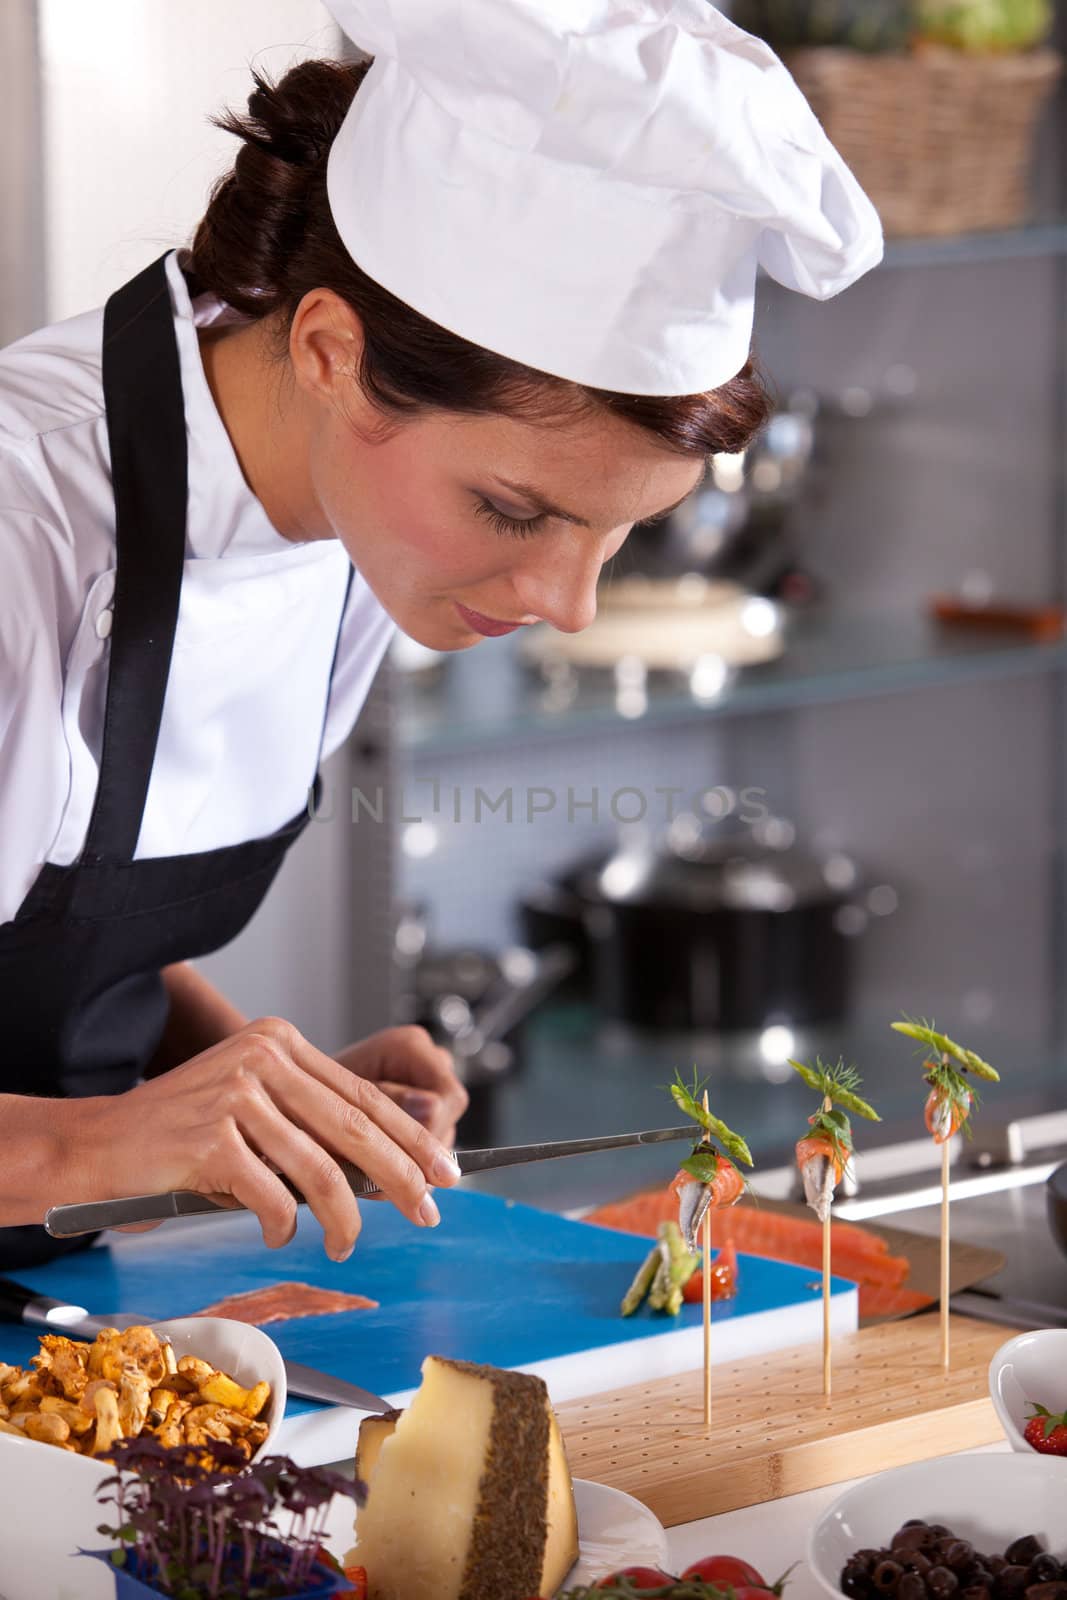 Chef styling an amuse by Fotosmurf